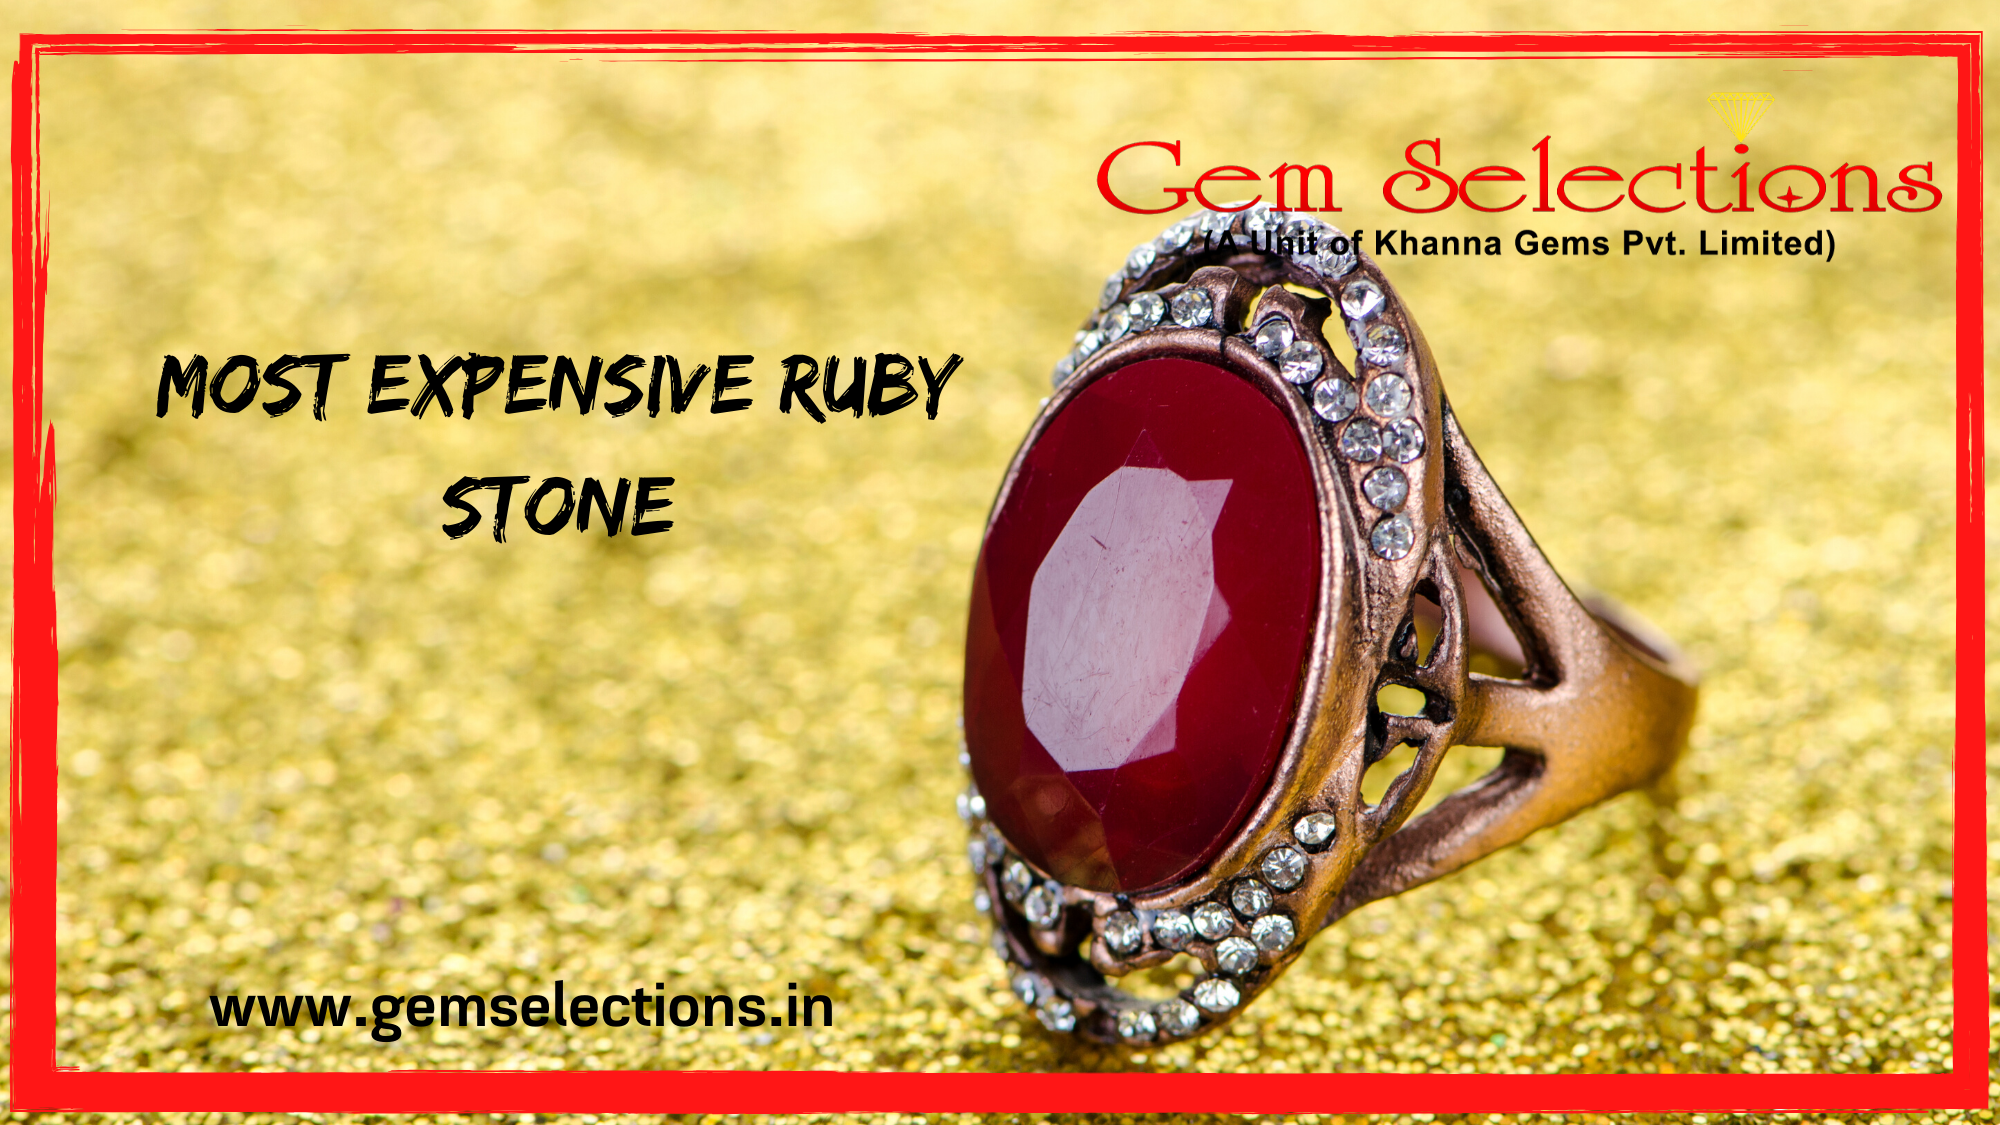 5 most expensive ruby stones